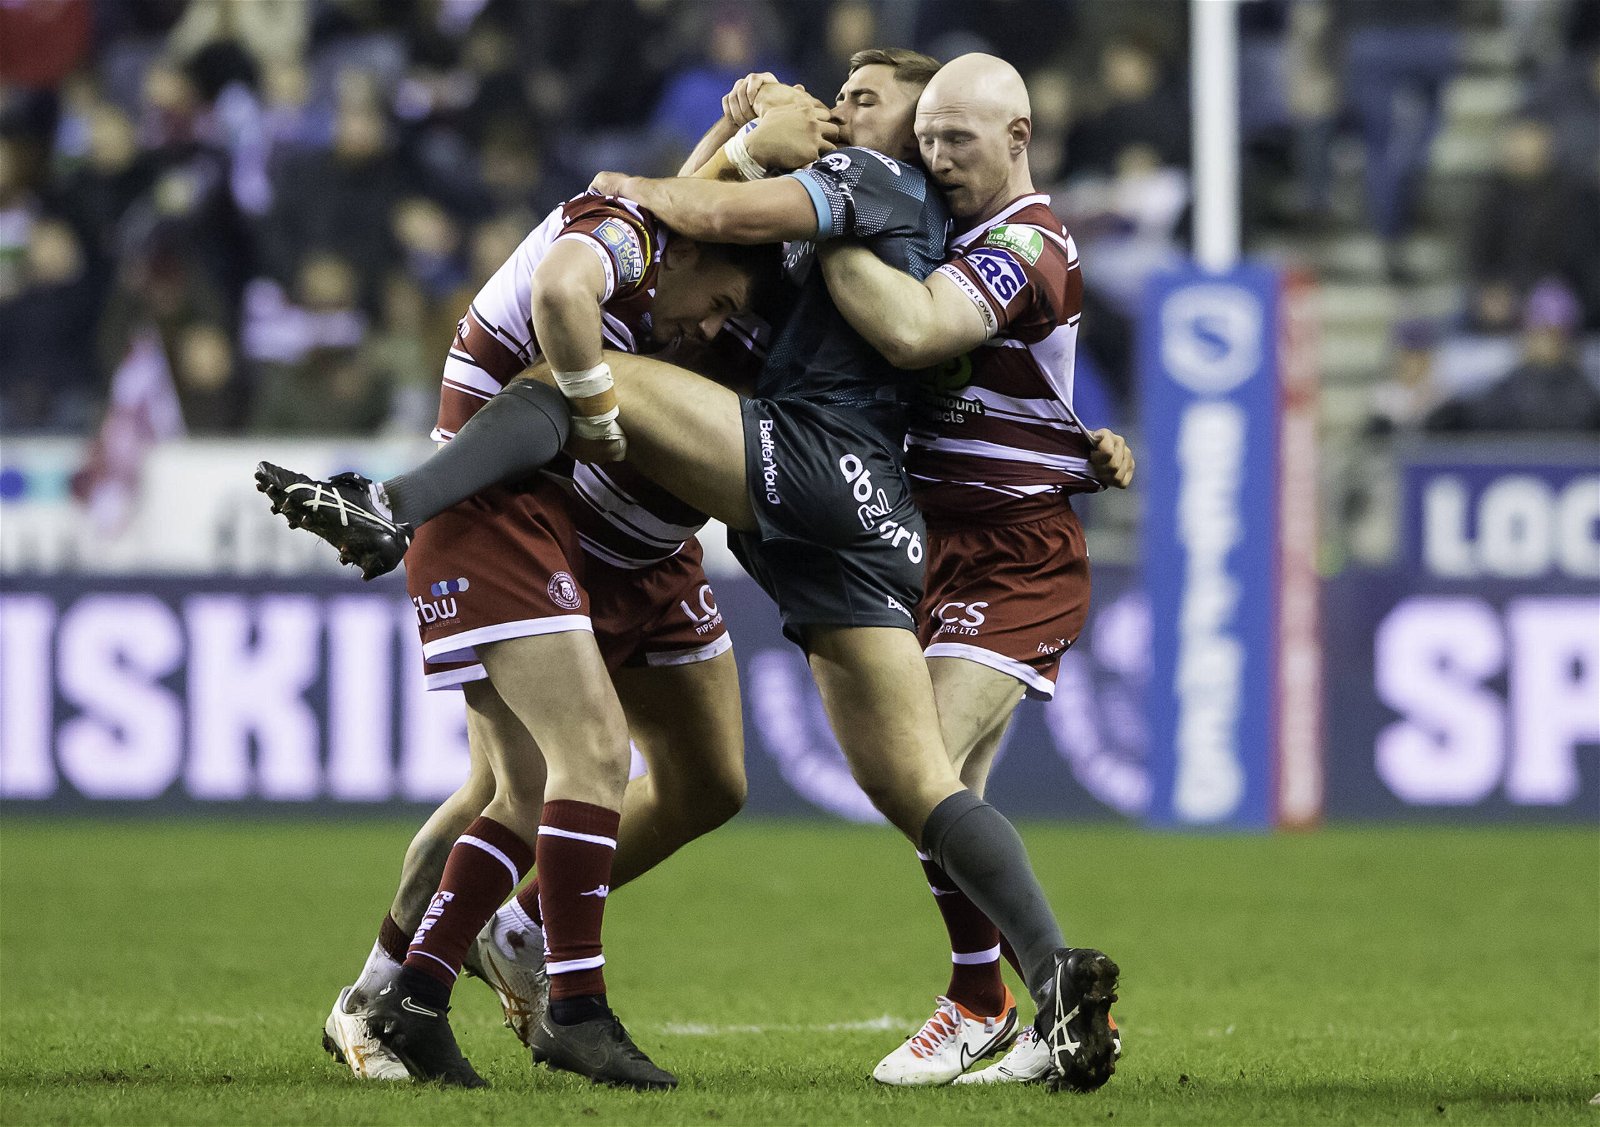 Sam Hewitt Huddersfield Giants tackled by Wigan Warriors players